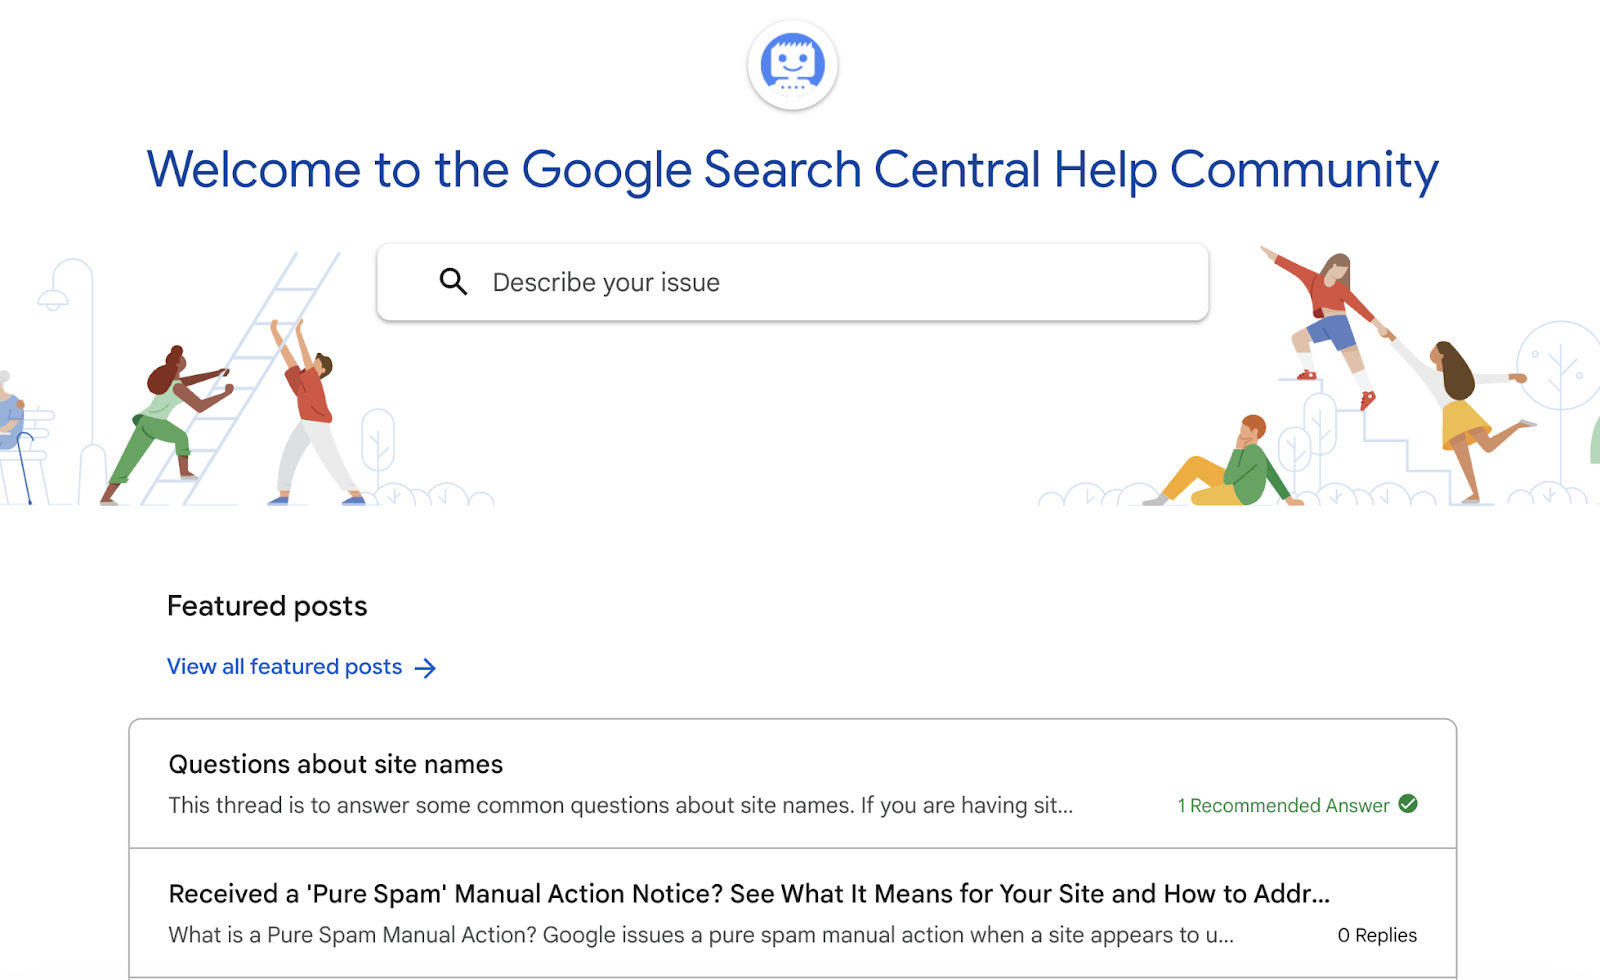 Google Search Central Help Community ،mepage with search bar and featured posts.